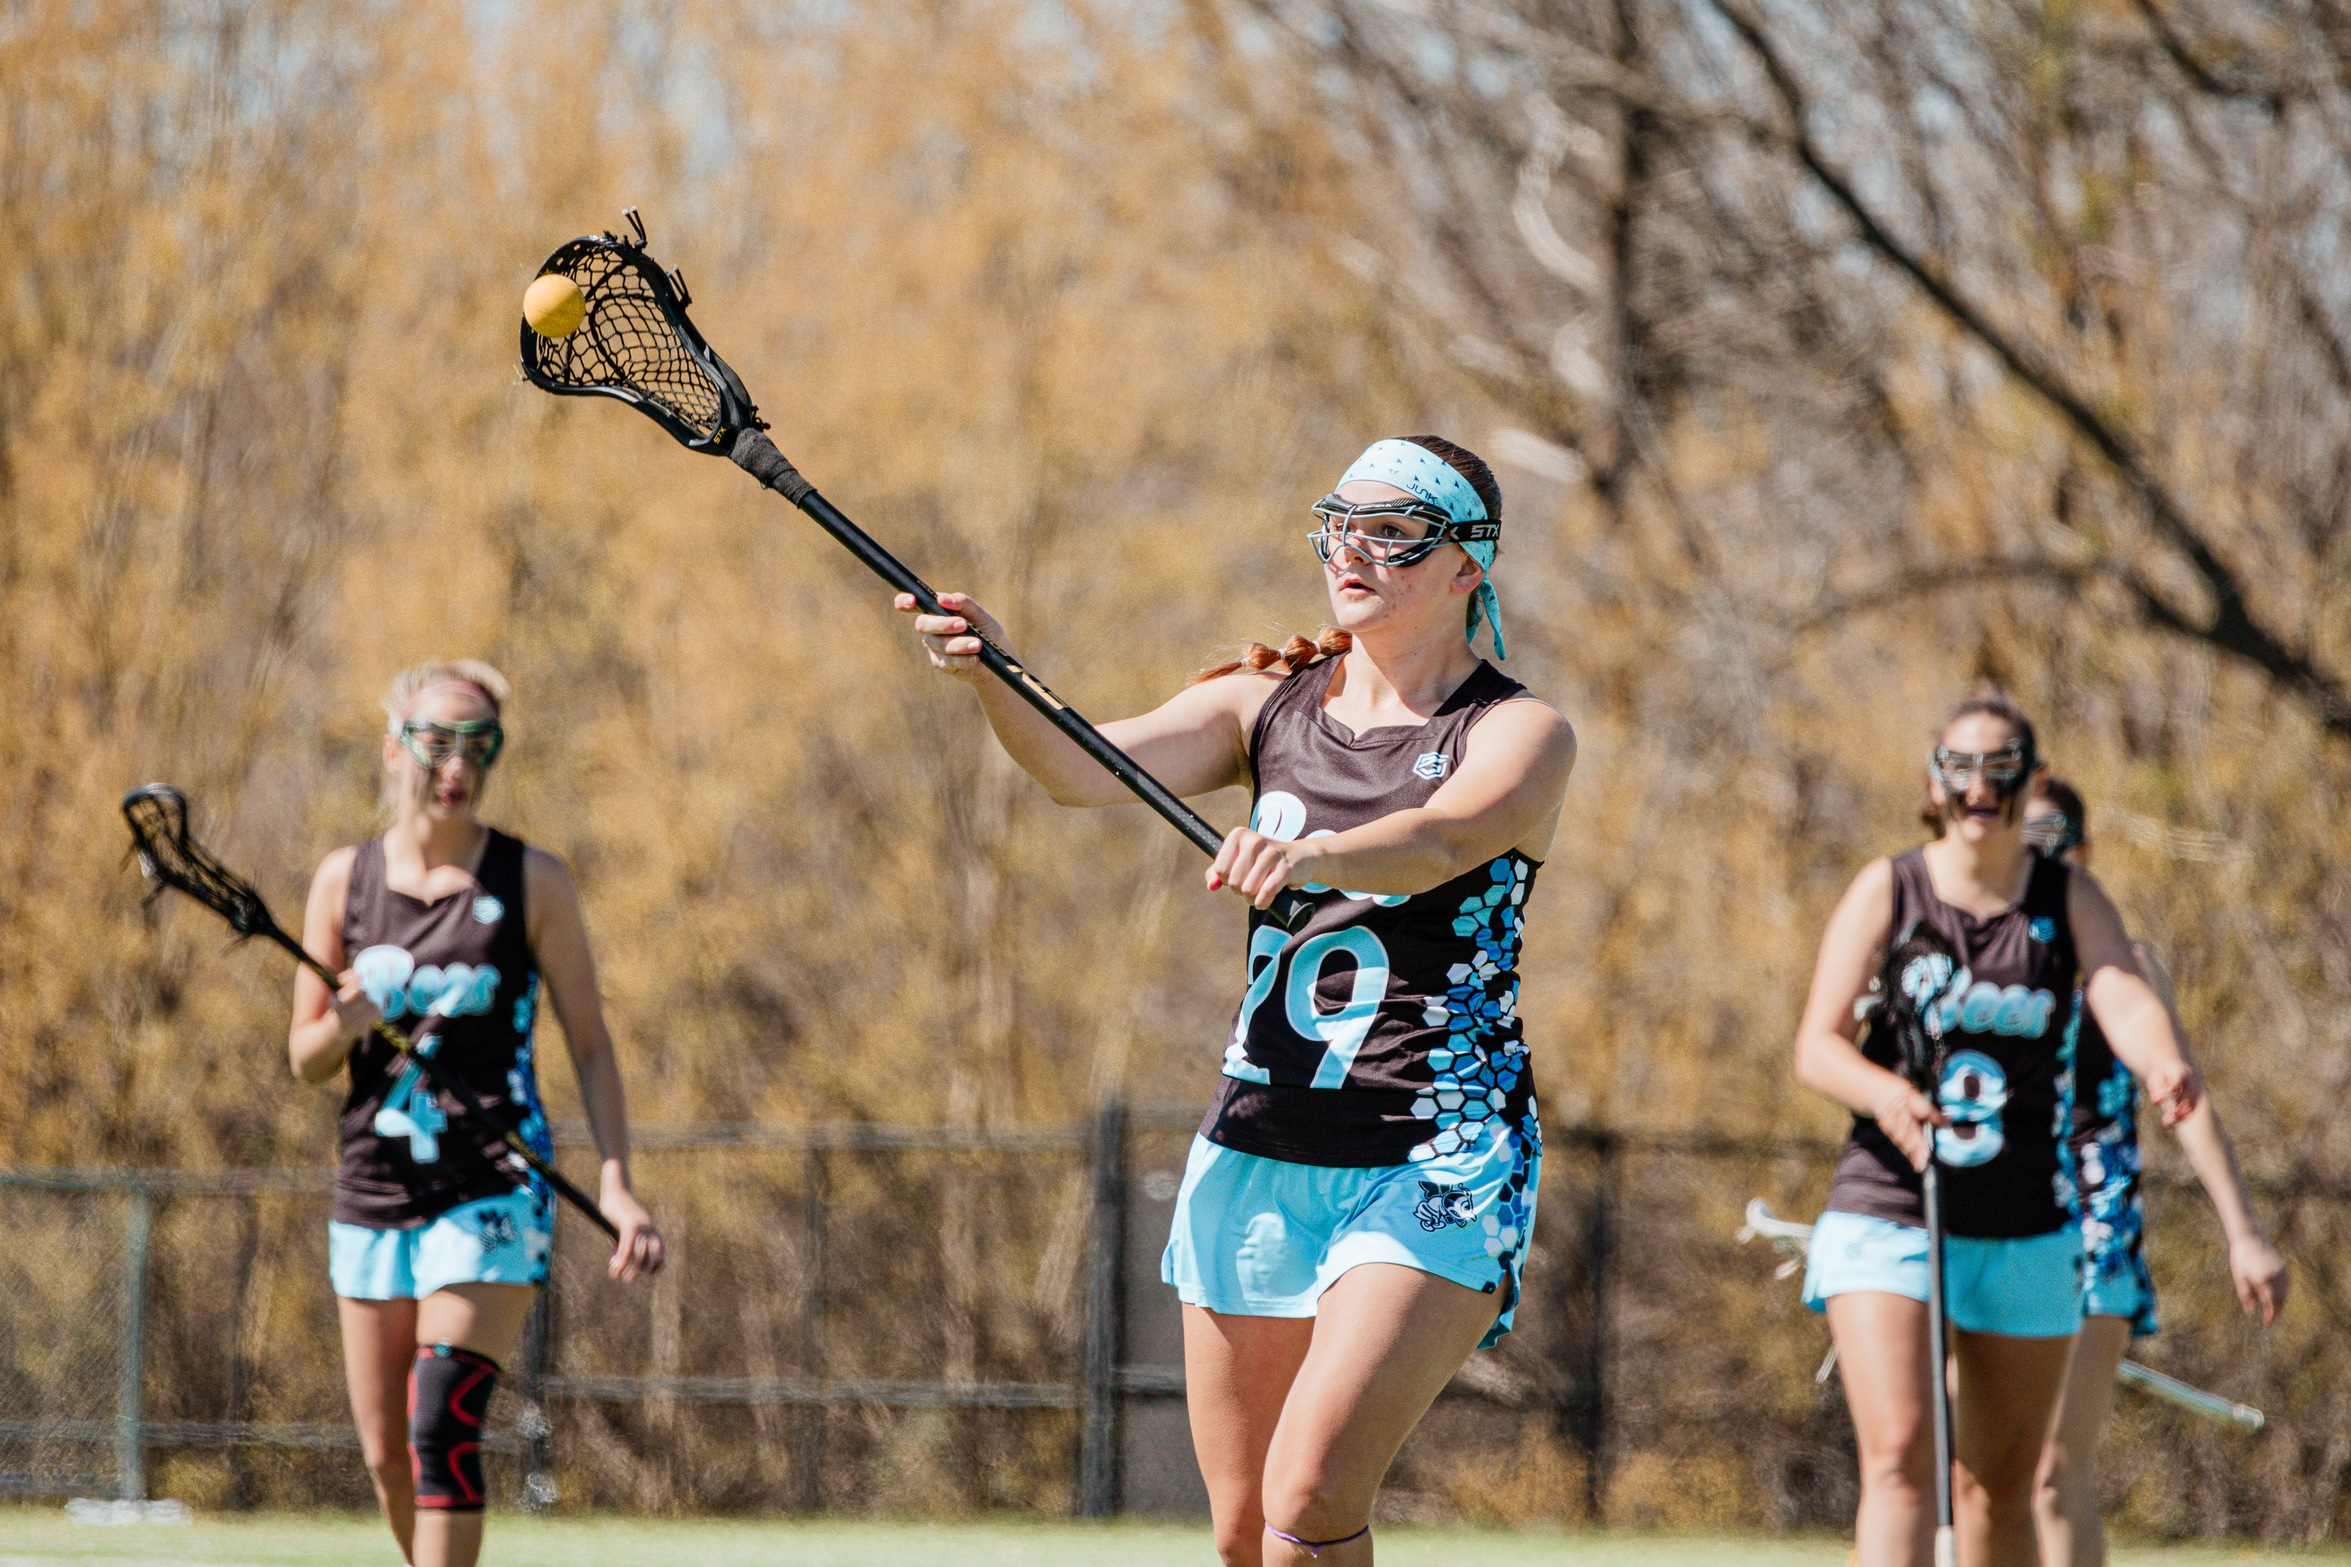 SAU women’s lacrosse remains undefeated in conference play after a 13-10 decision over Culver-Stockton